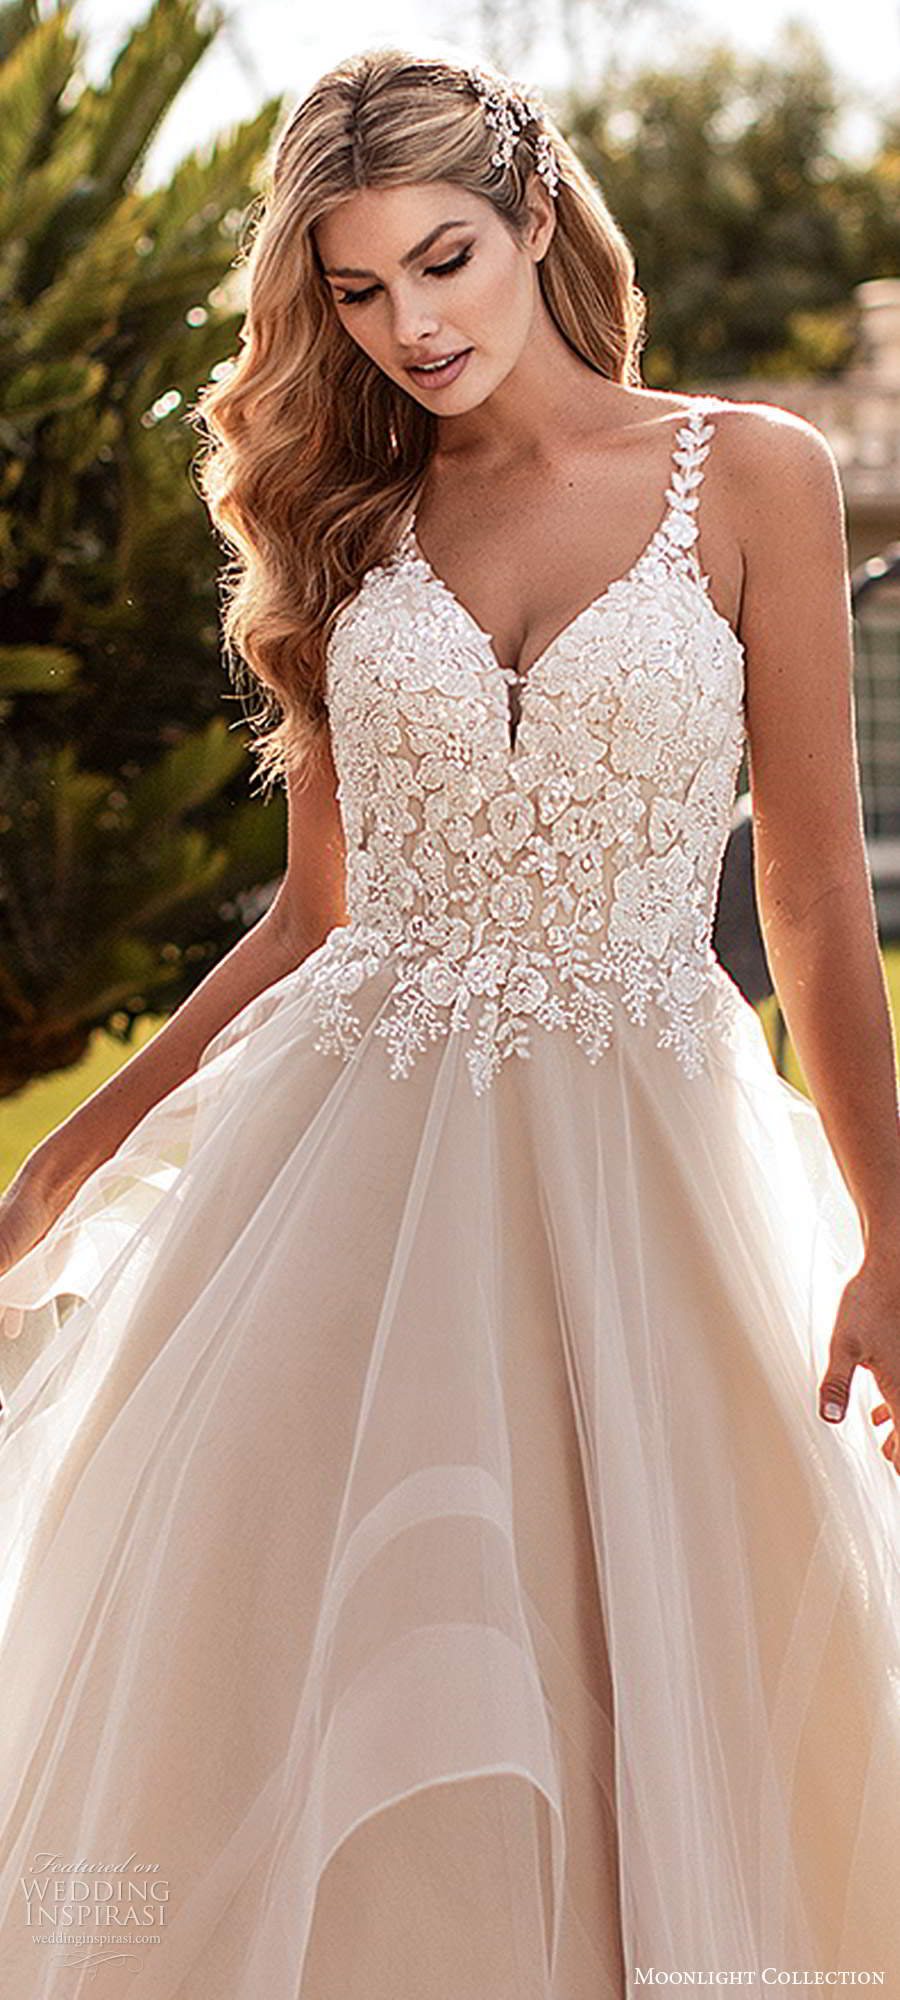 moonlight collection fall 2020 bridal sleeveless beaded straps sweetheart neckline embellished bodice a line ball gown wedding dress tiered skirt chapel train (4) zv